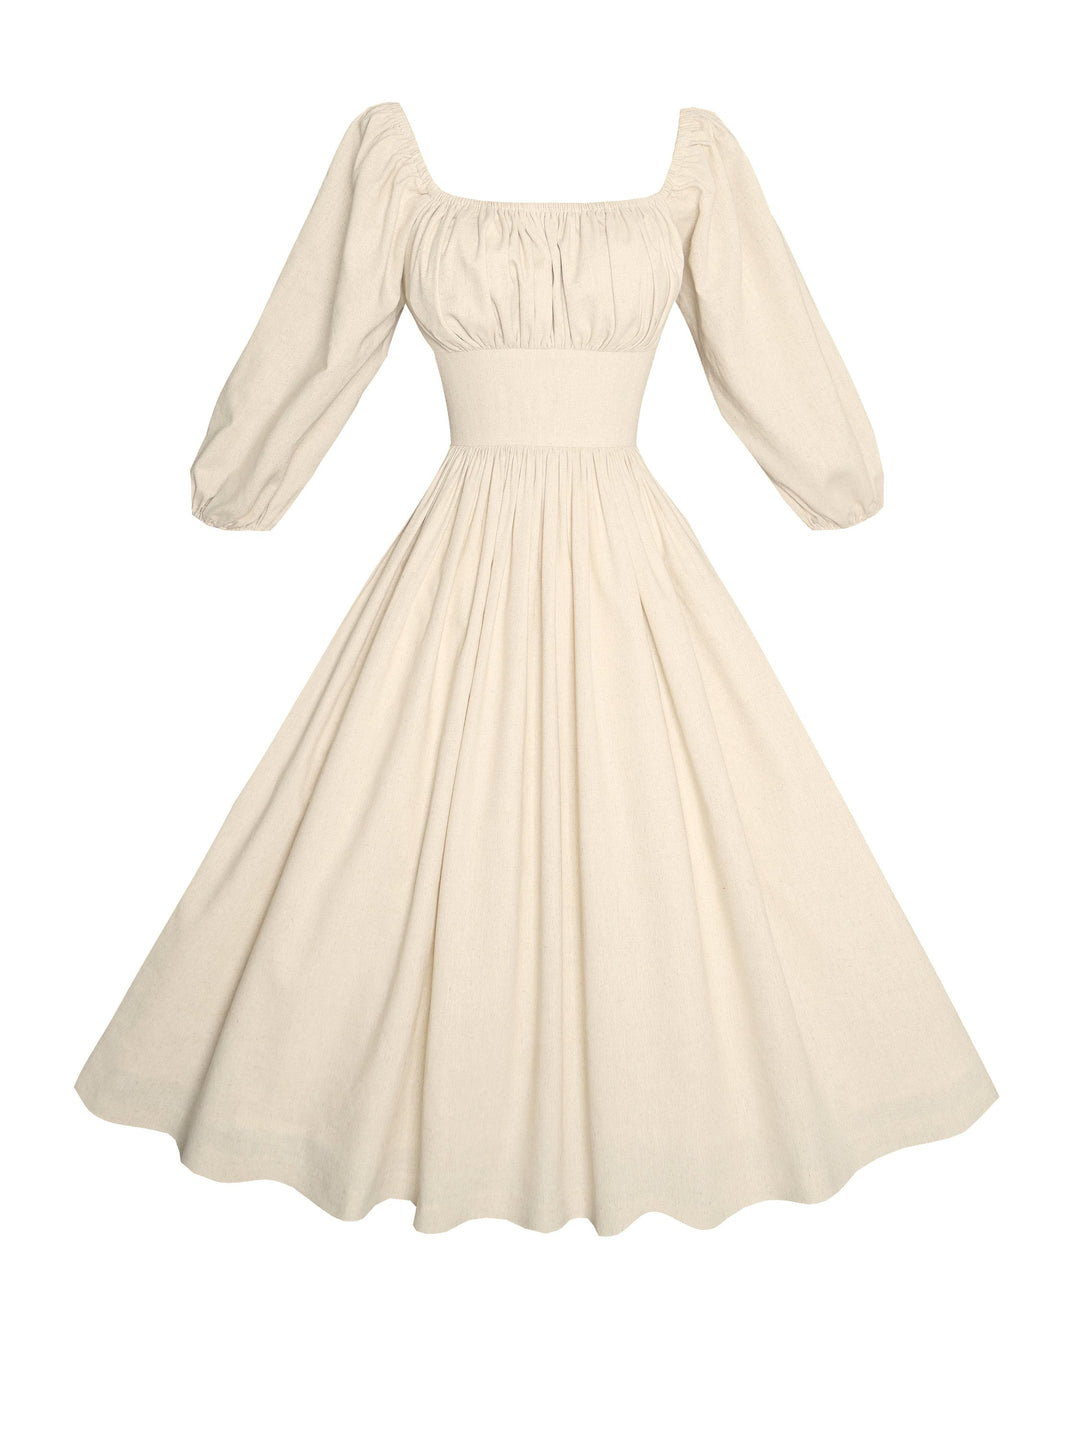 MTO - Sydney Dress in Parchment Ivory Linen